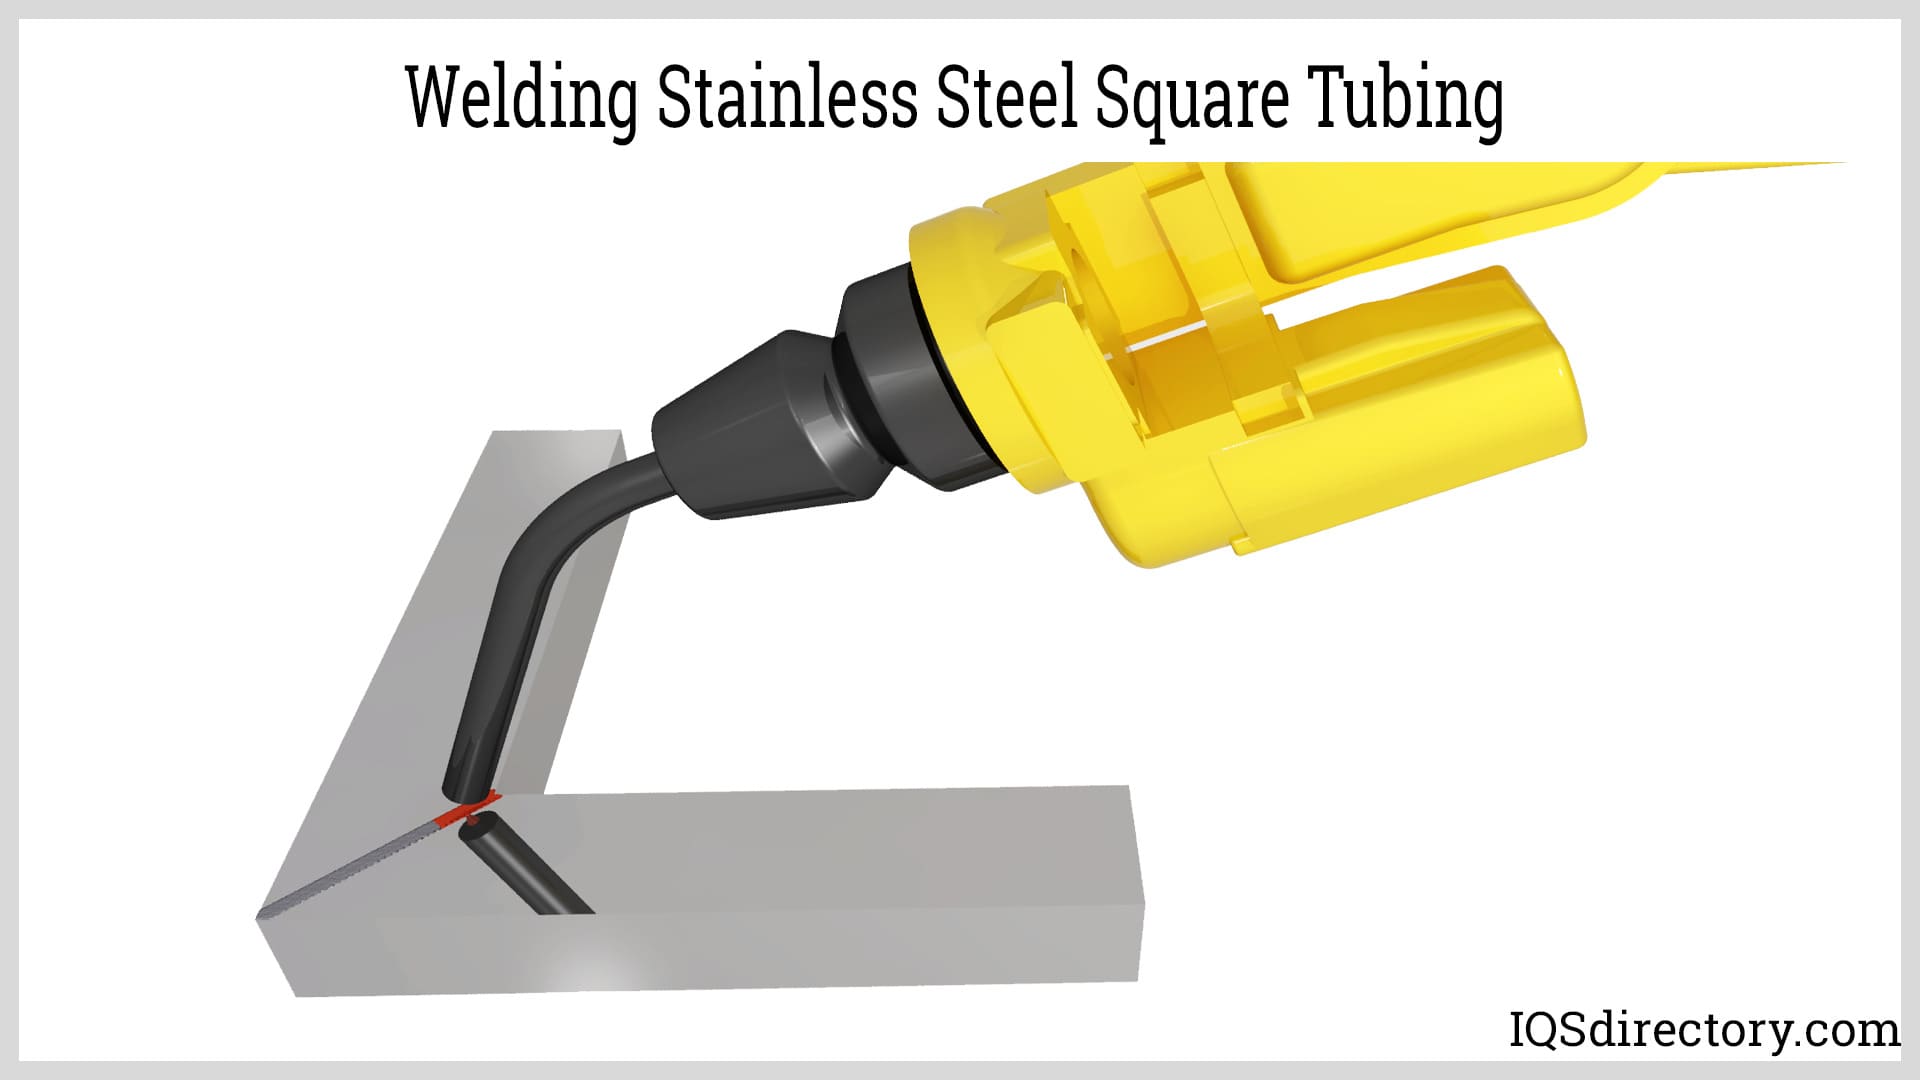 Welding Stainless Steel Square Tubing